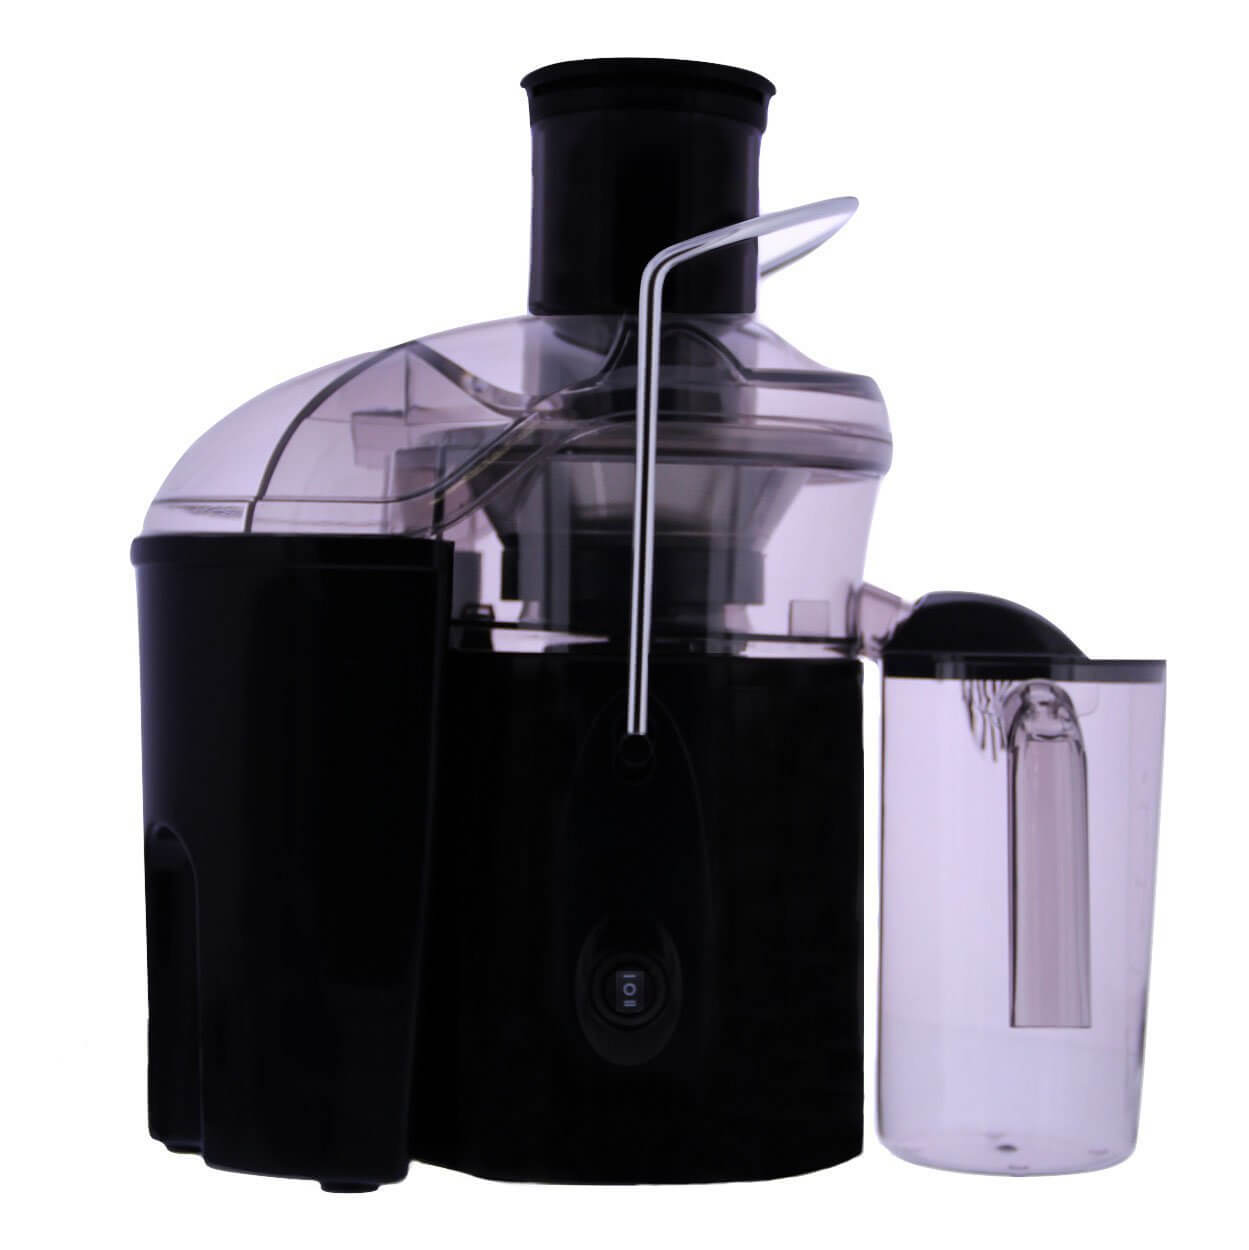  Jack Lalanne’s 100th Anniversary Fusion Juicer SLH90 